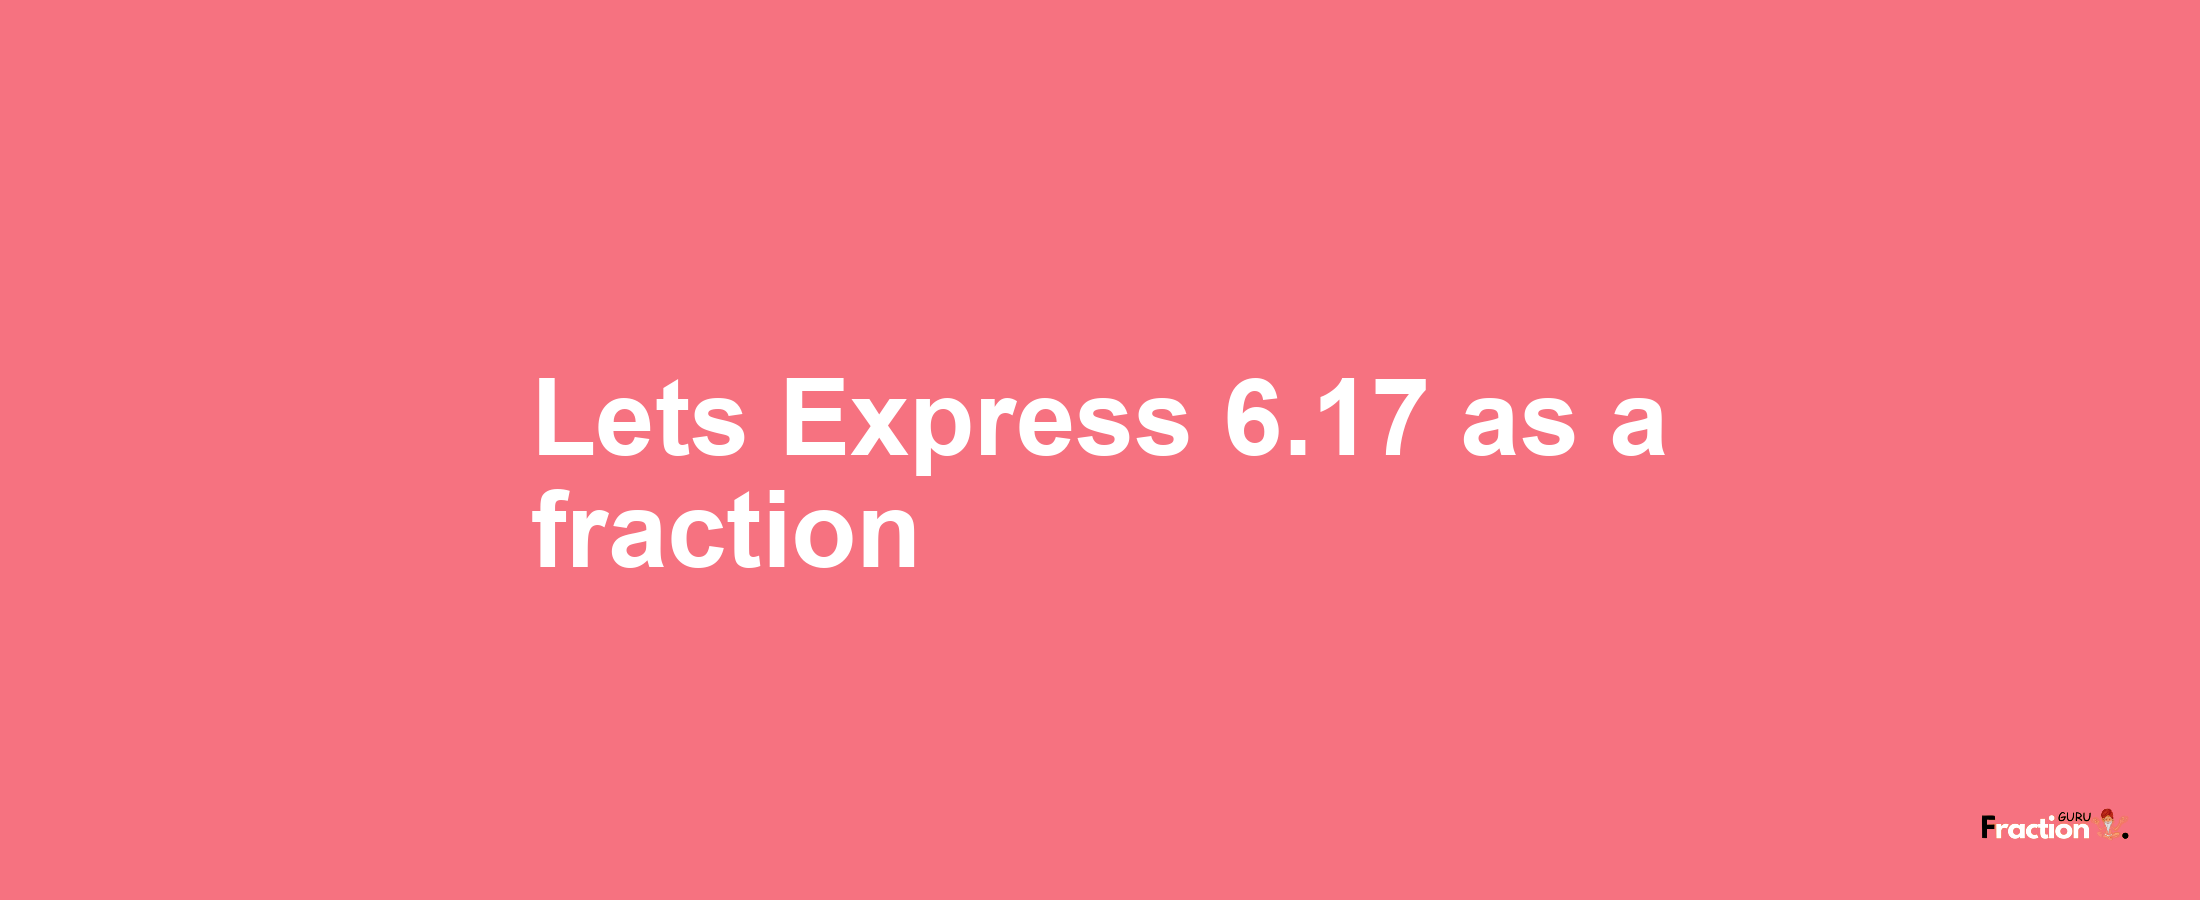 Lets Express 6.17 as afraction